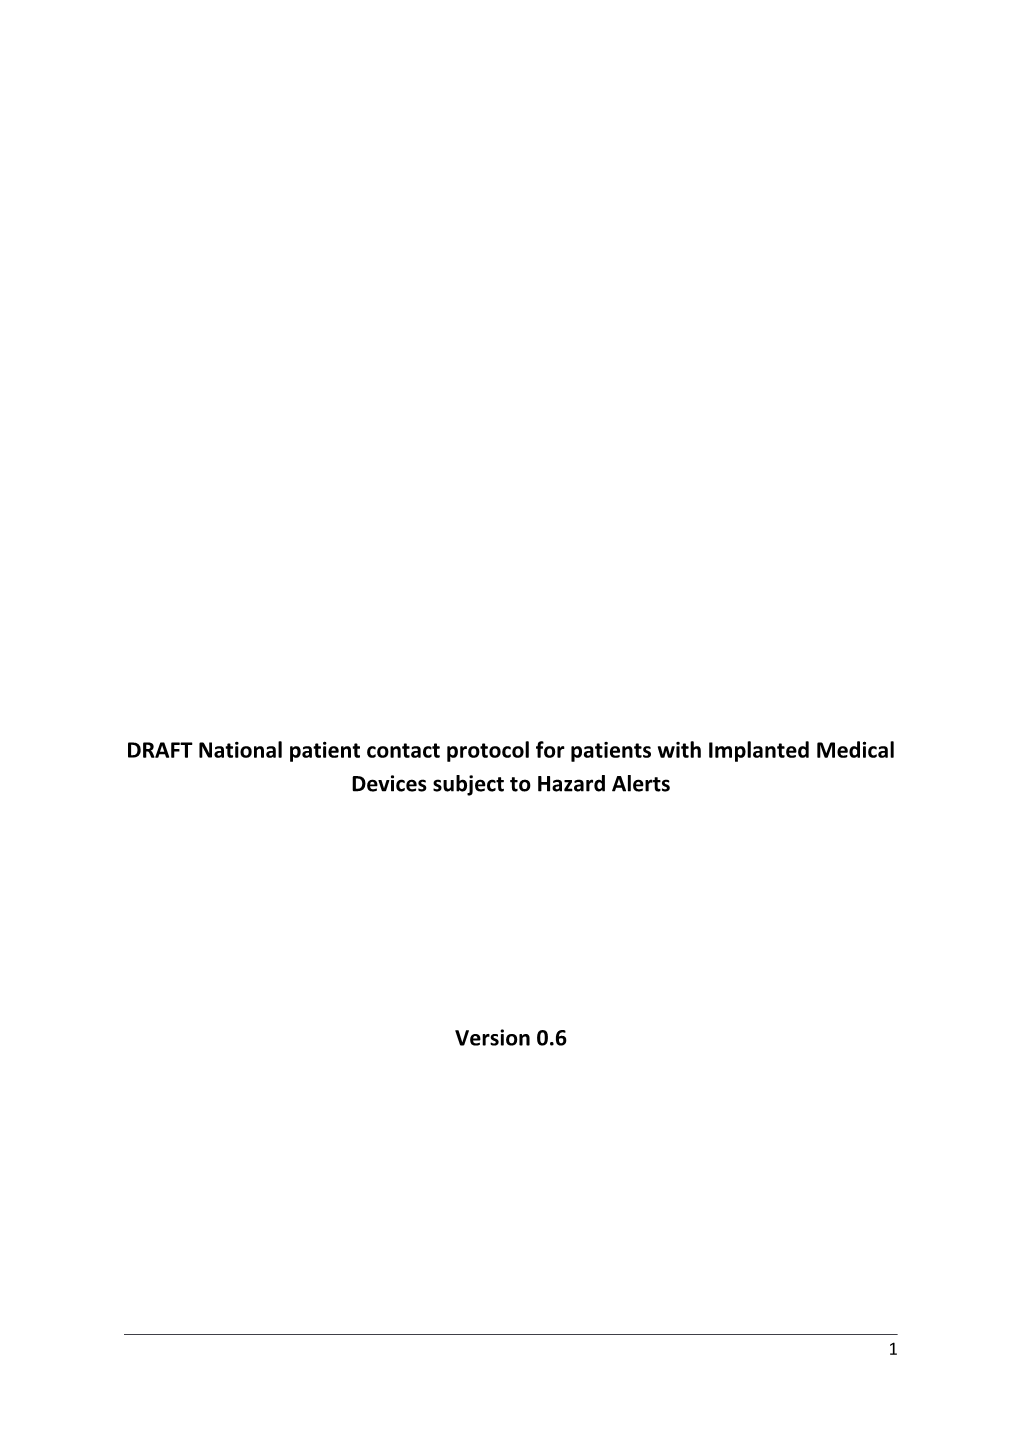 DRAFT National Patient Contact Protocol for Patients with Implanted Medical Devices Subject